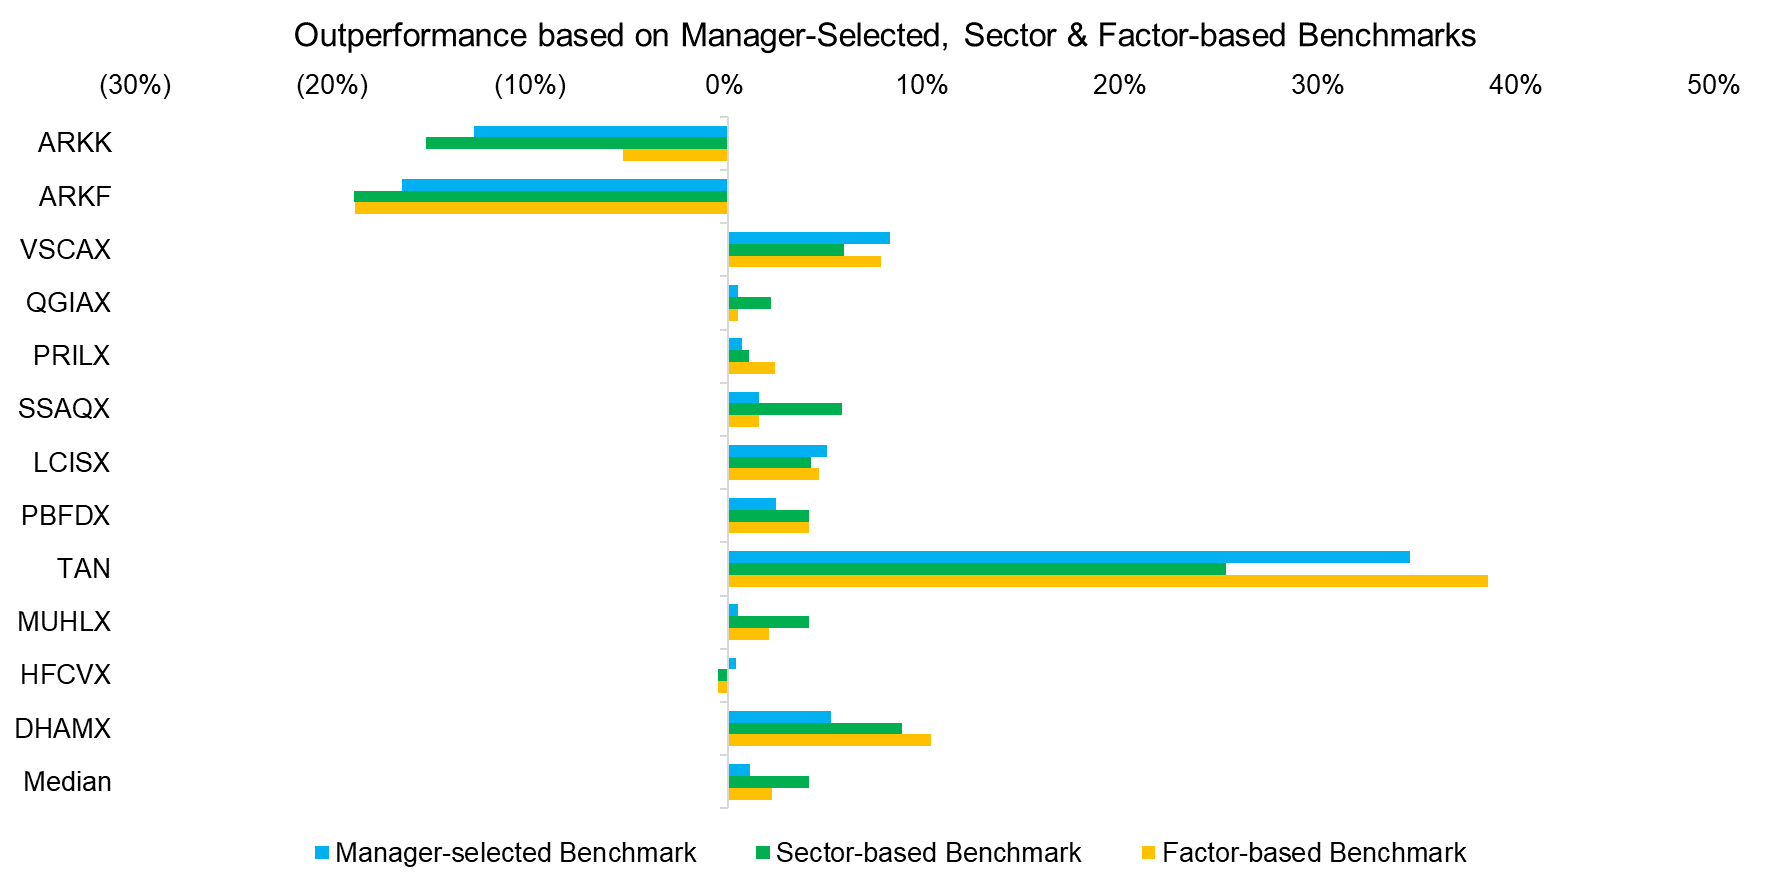 Outperformance based on Manager-Selected, Sector & Factor-based Benchmarks